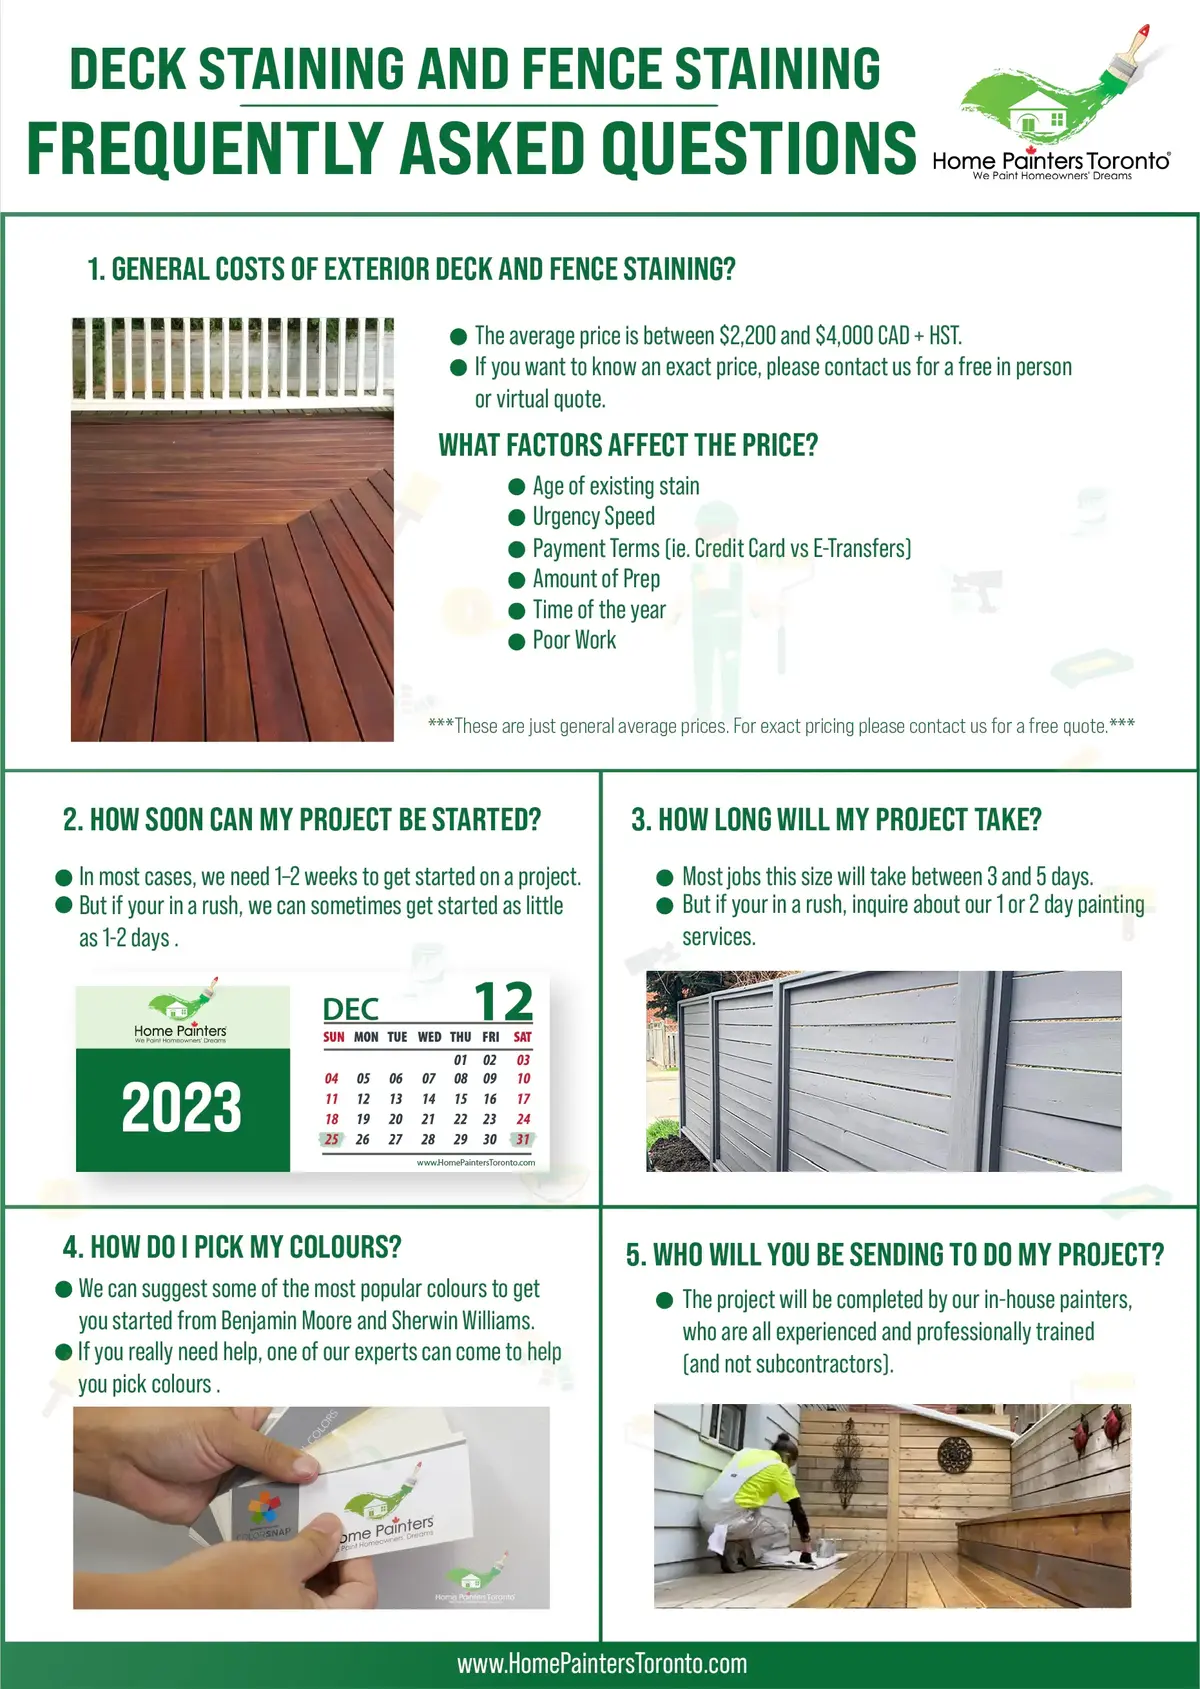 Infographic of frequently asked questions about exterior deck and fence staining